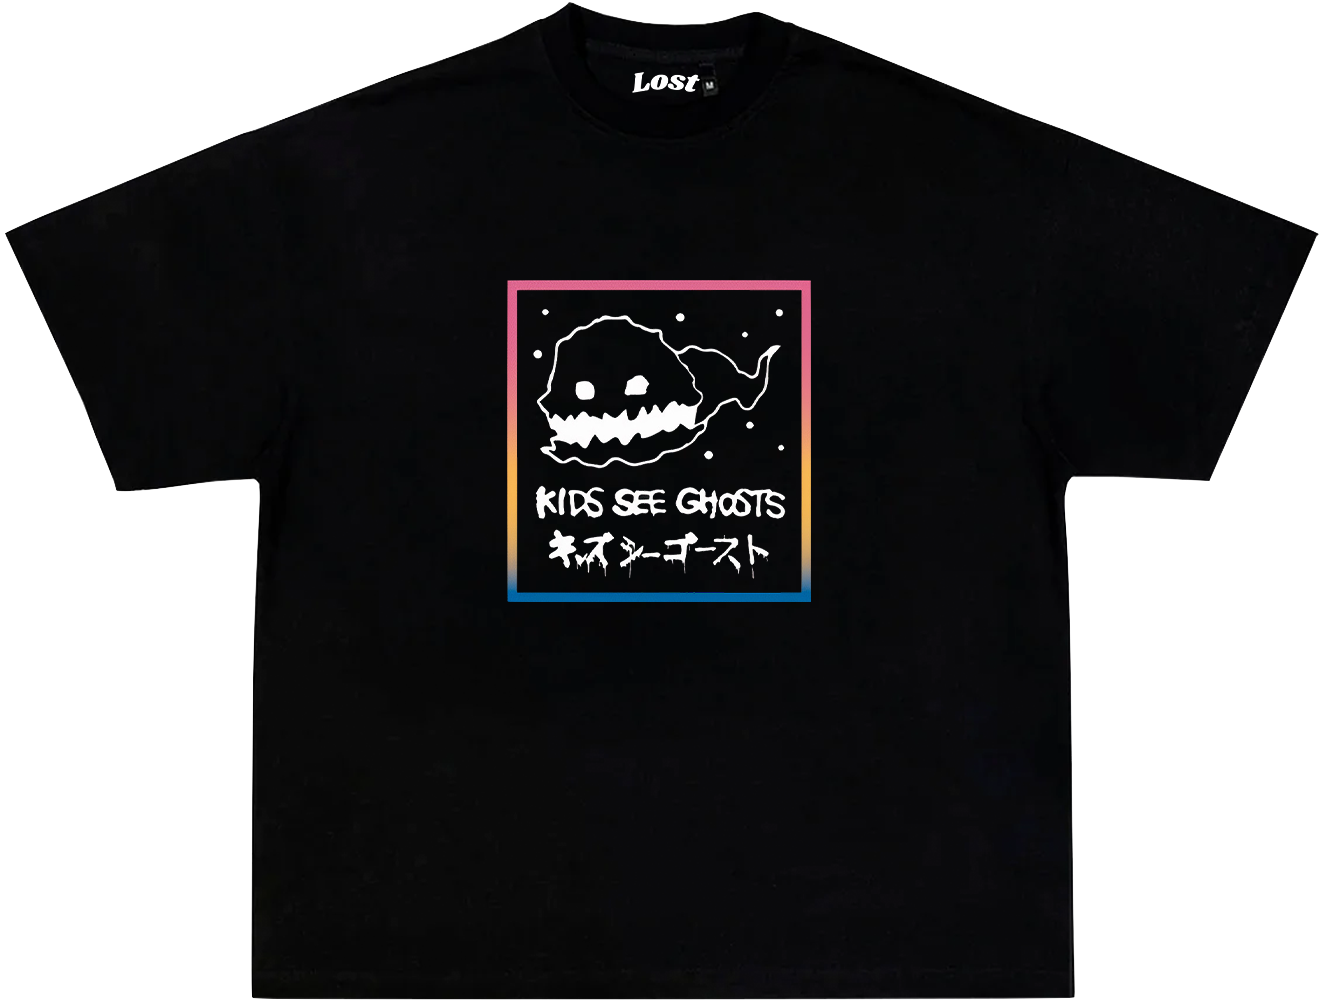 KANYE WEST "Kids see ghosts" Oversized T-shirt